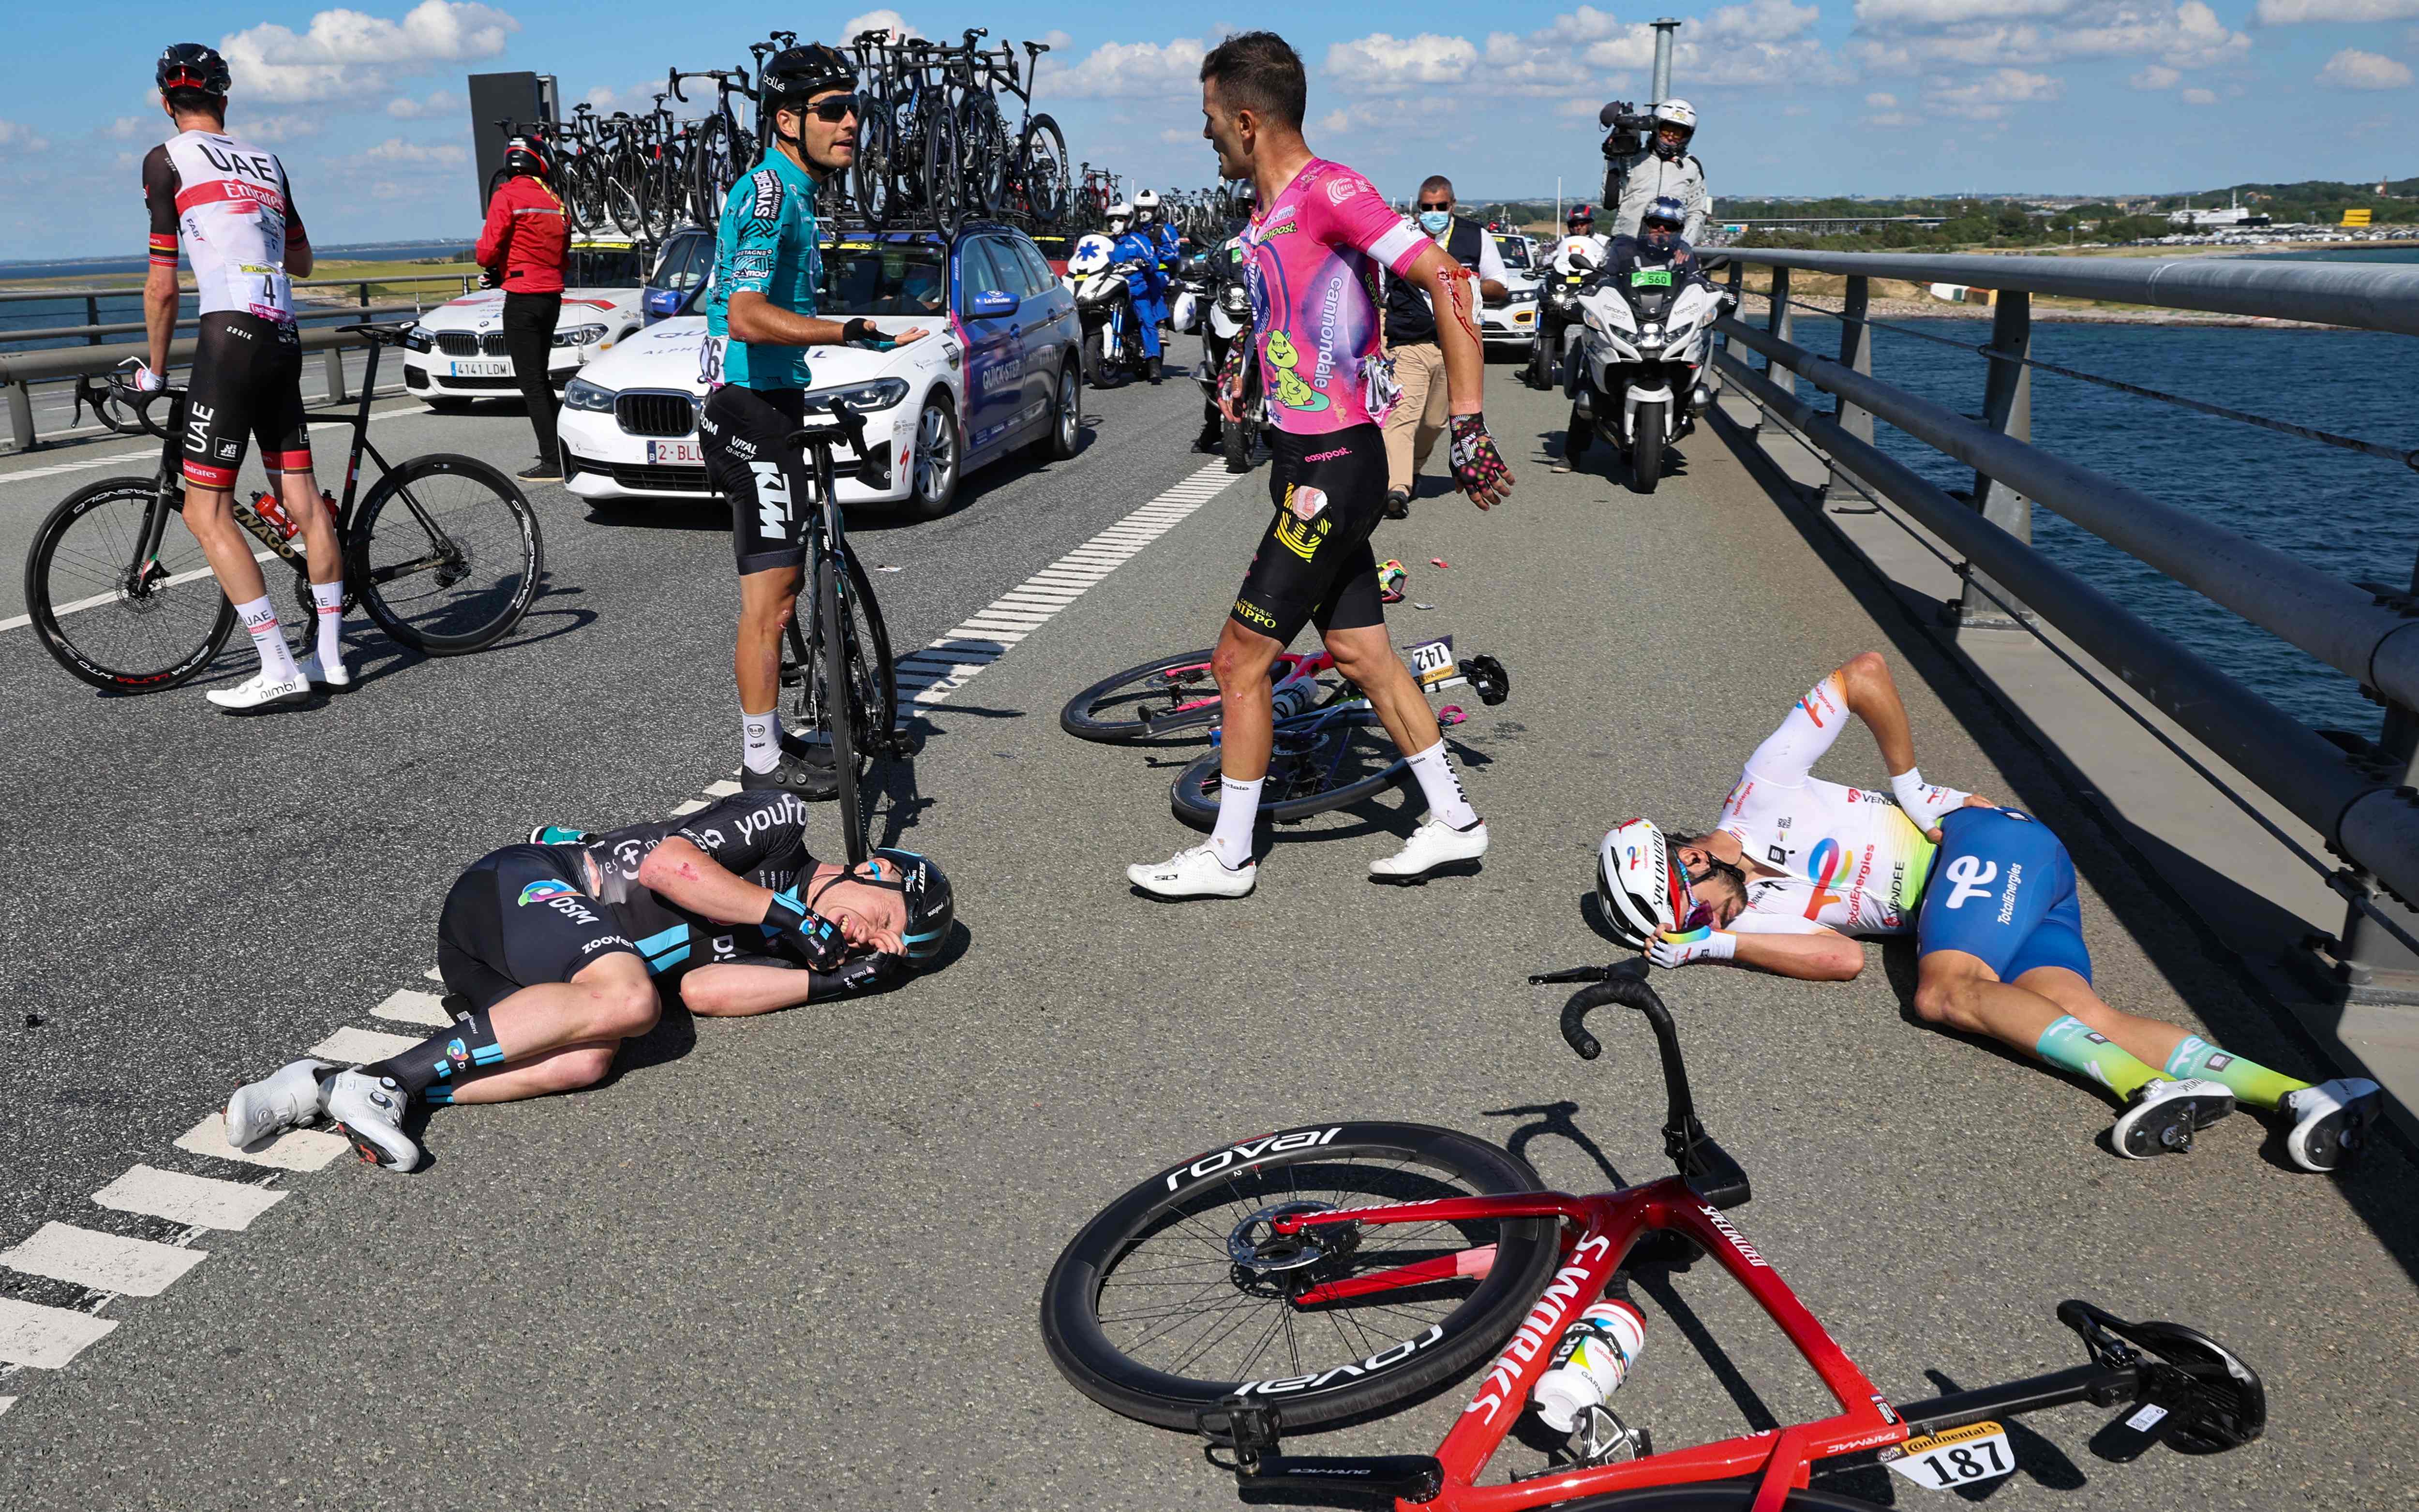 Riders suffer a crash on the Great Belt Fixed Link bridge (Storebaelt) during Saturday’s 2nd stage